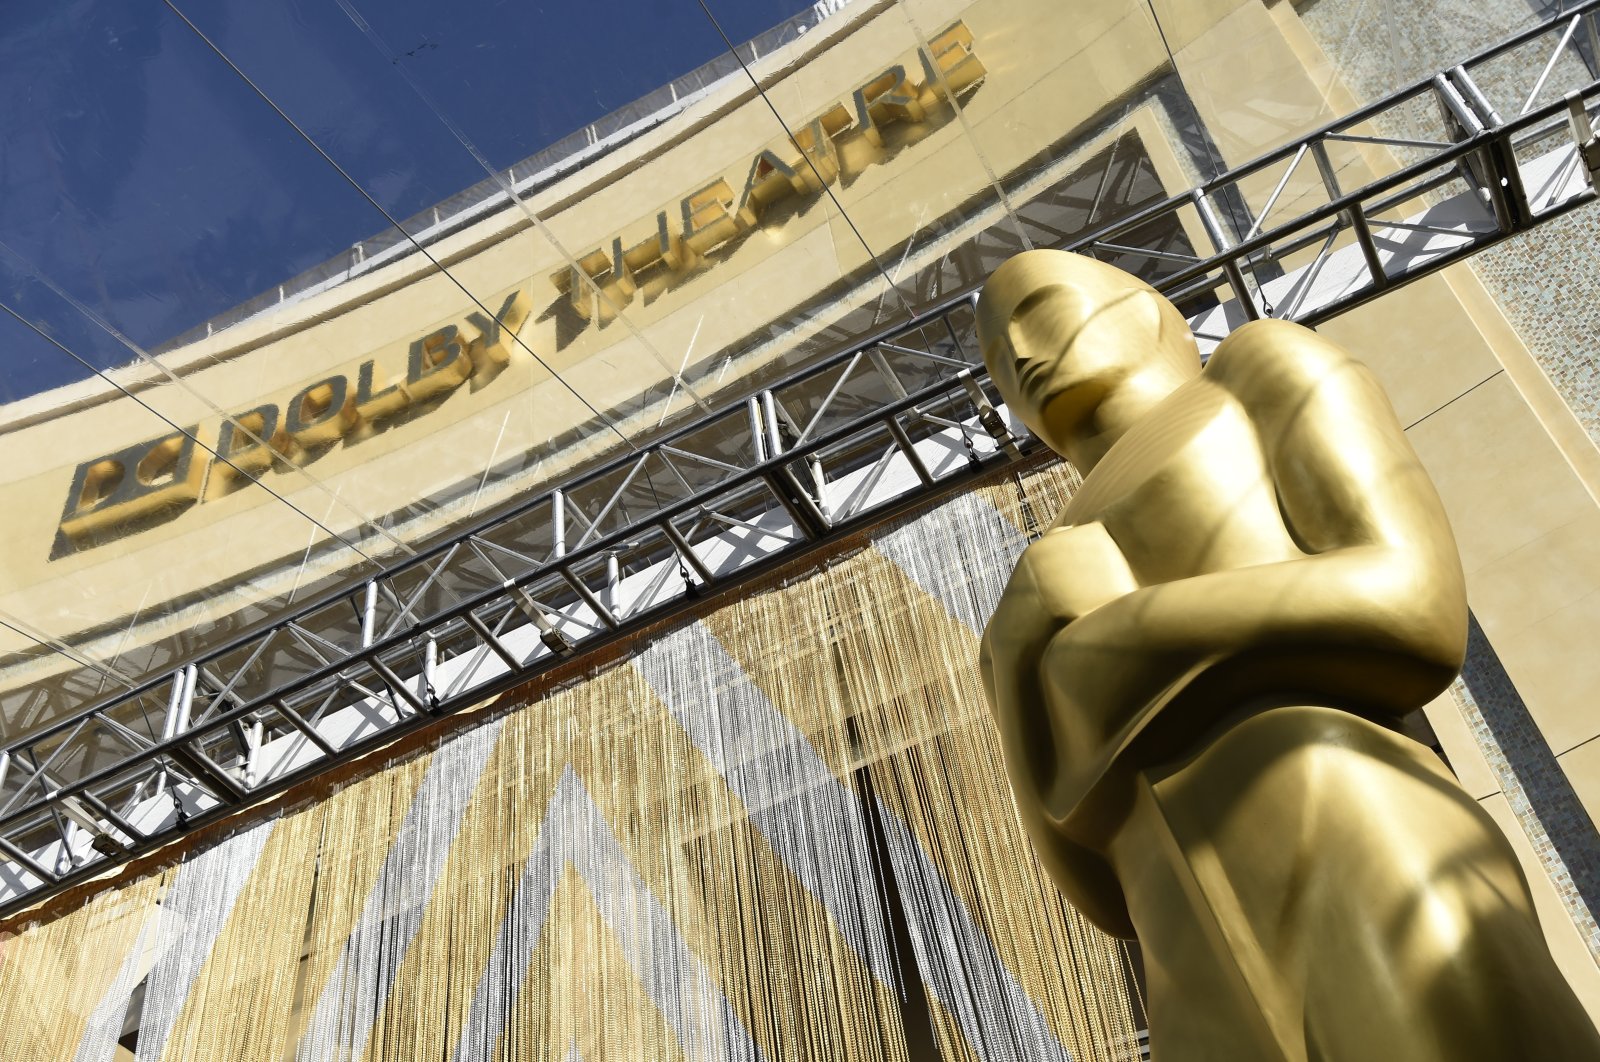 An Oscar statue is pictured underneath the entrance to the Dolby Theater on Feb. 24, 2016, in Los Angeles. The Oscars will be held on Sunday, March 27 at the Dolby Theatre in Los Angeles. (AP Photo)